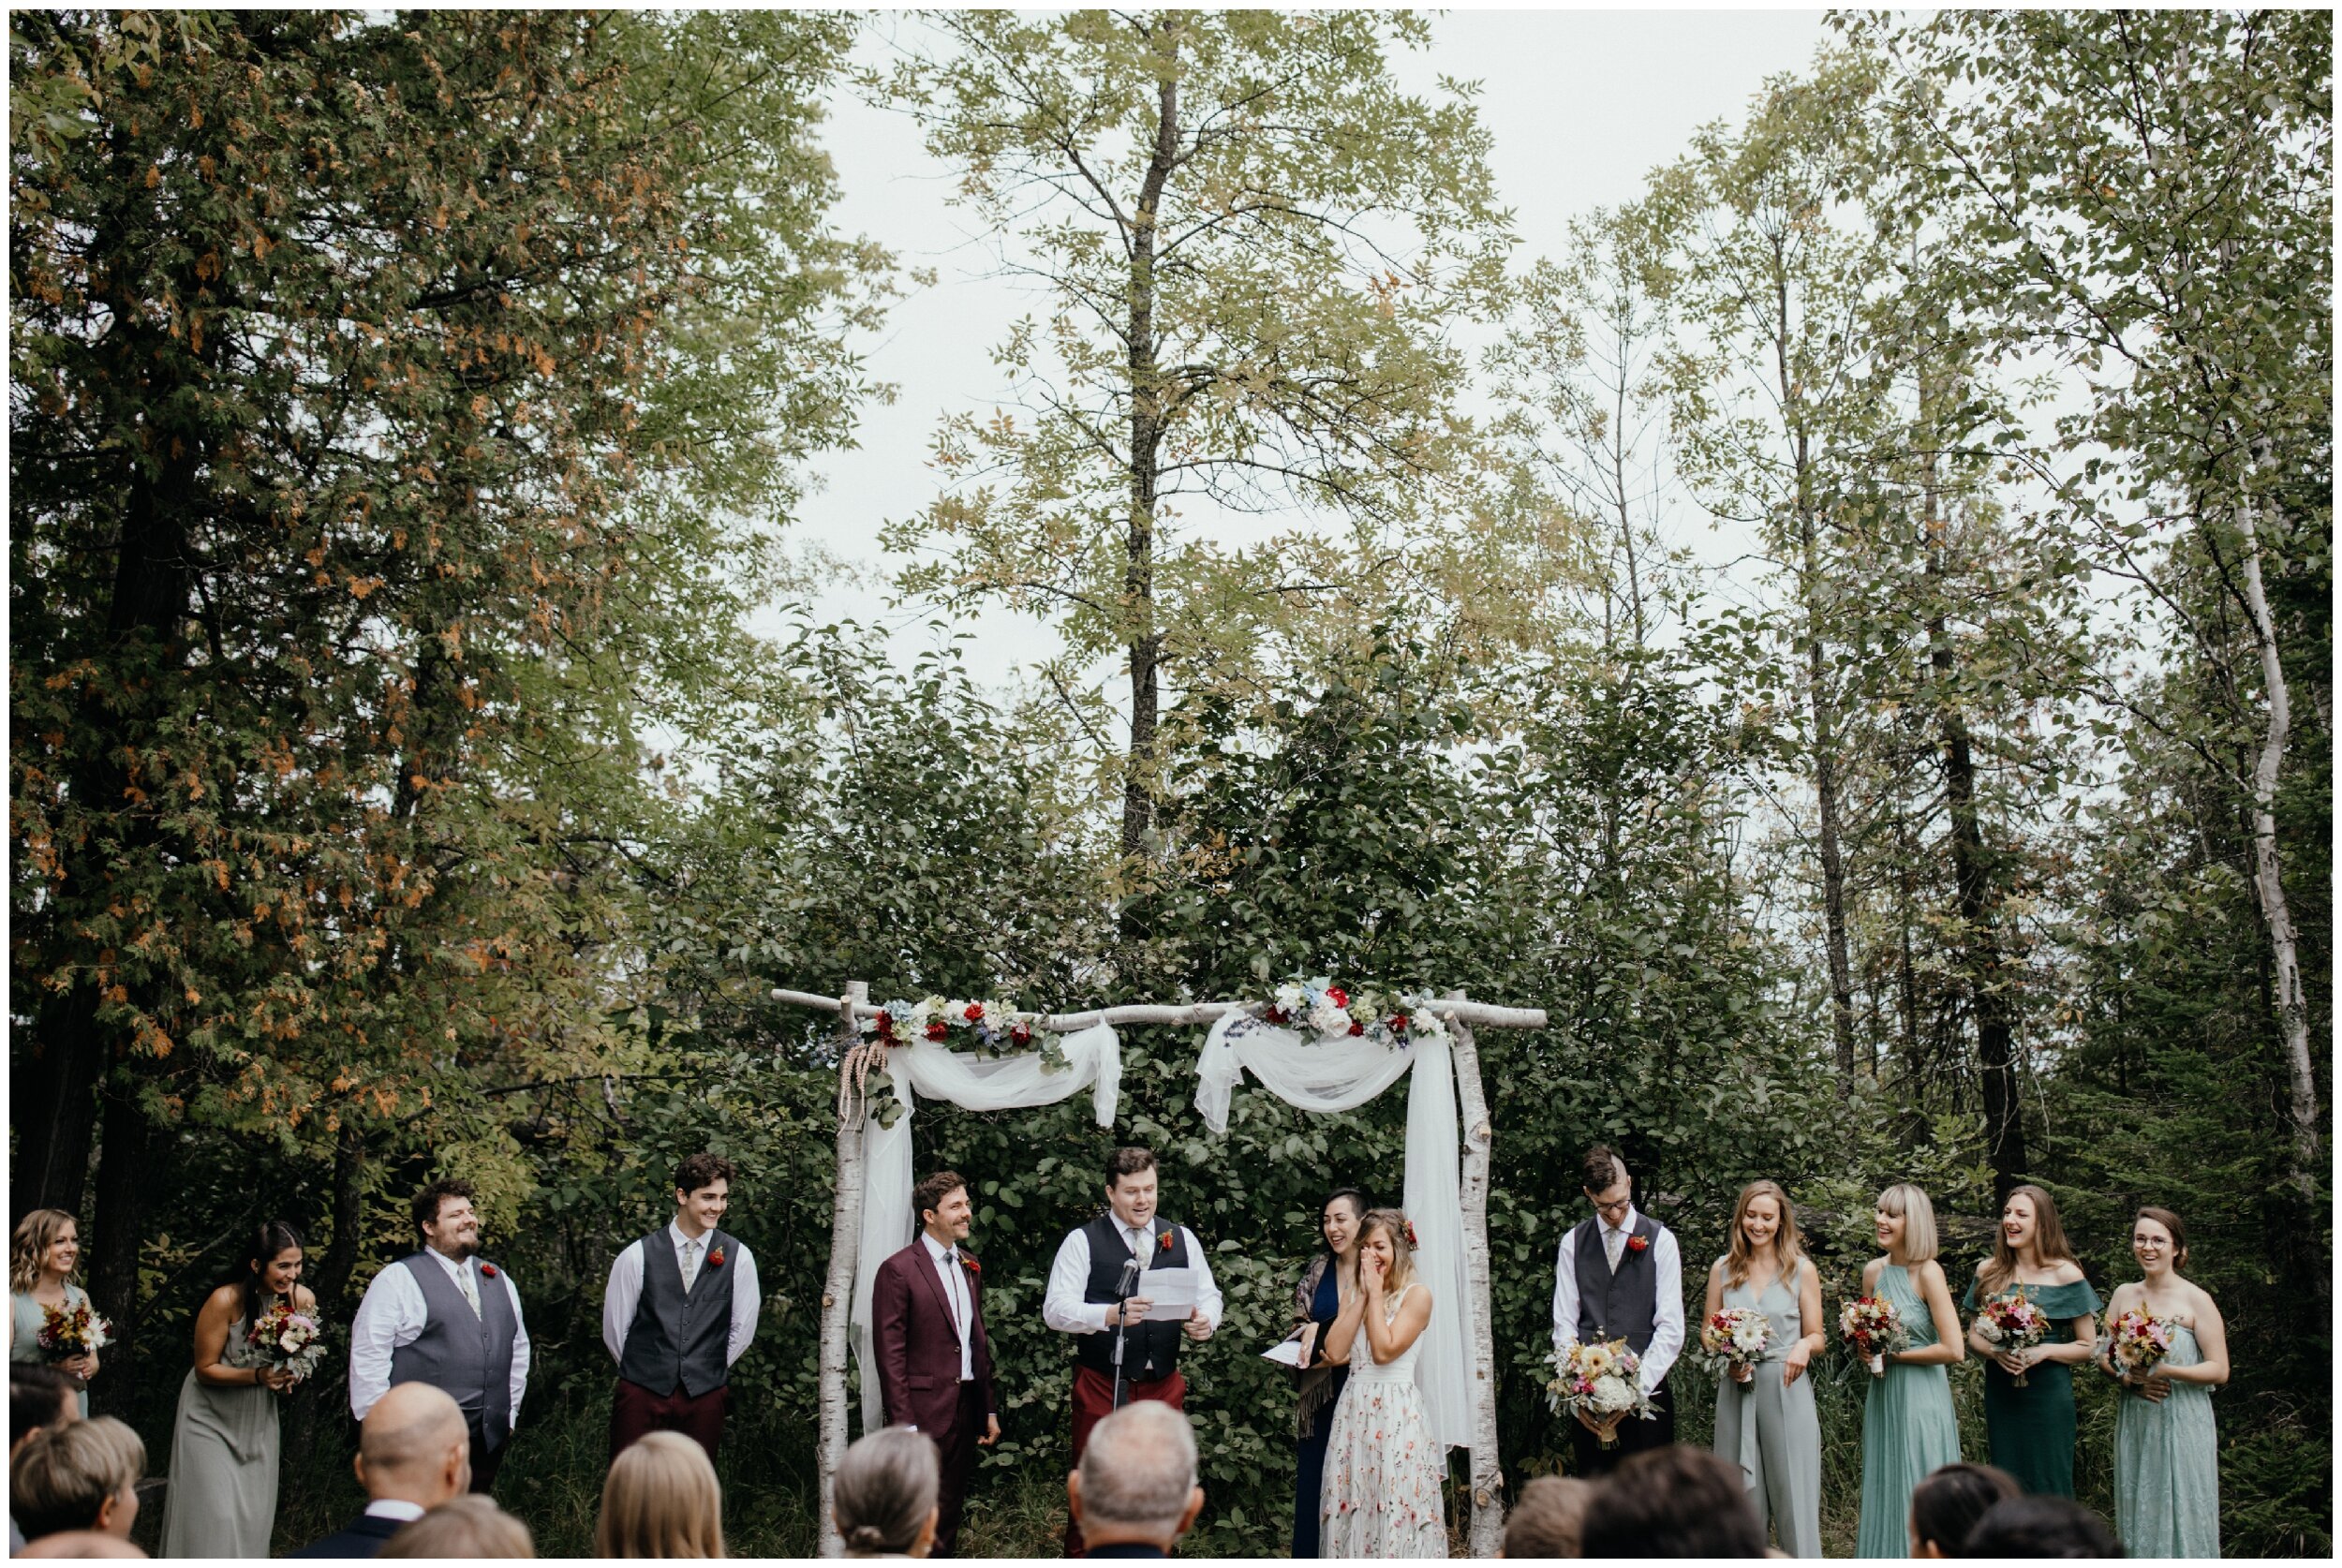 Outdoor wedding ceremony in the woods at Minnesota summer camp